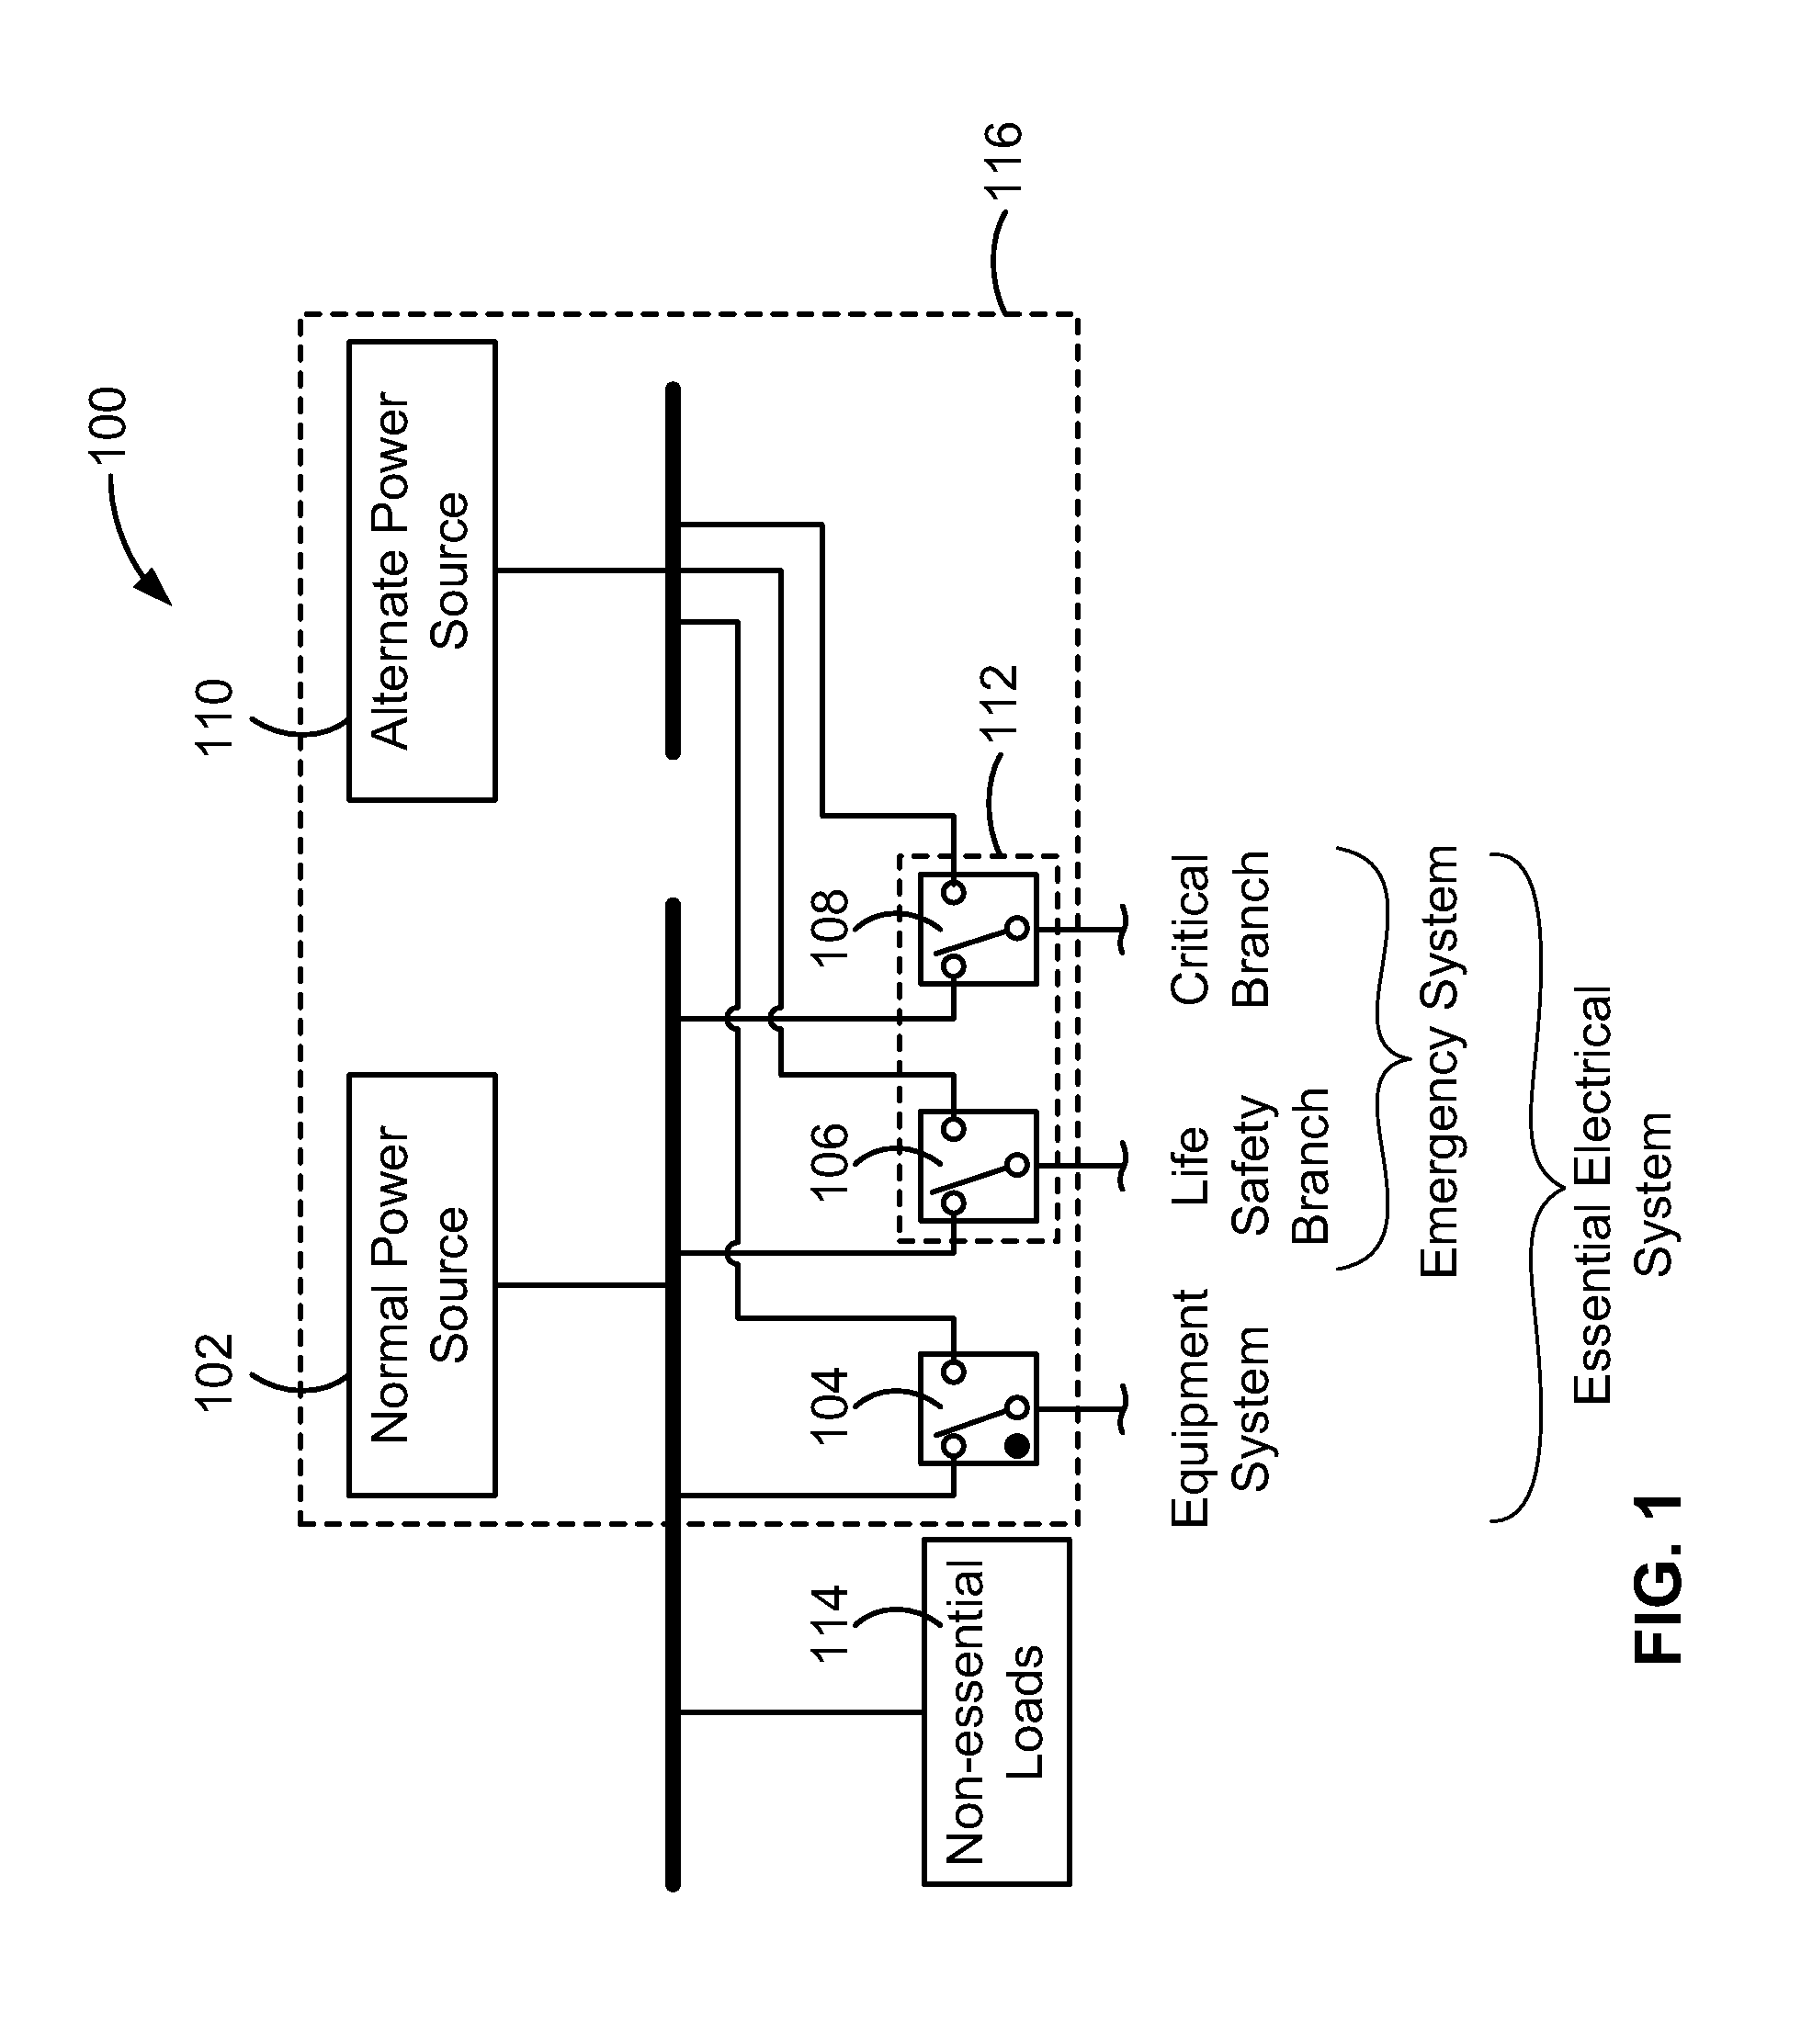 Automated emergency power supply test featuring user selection of load percentage or exhaust temperature